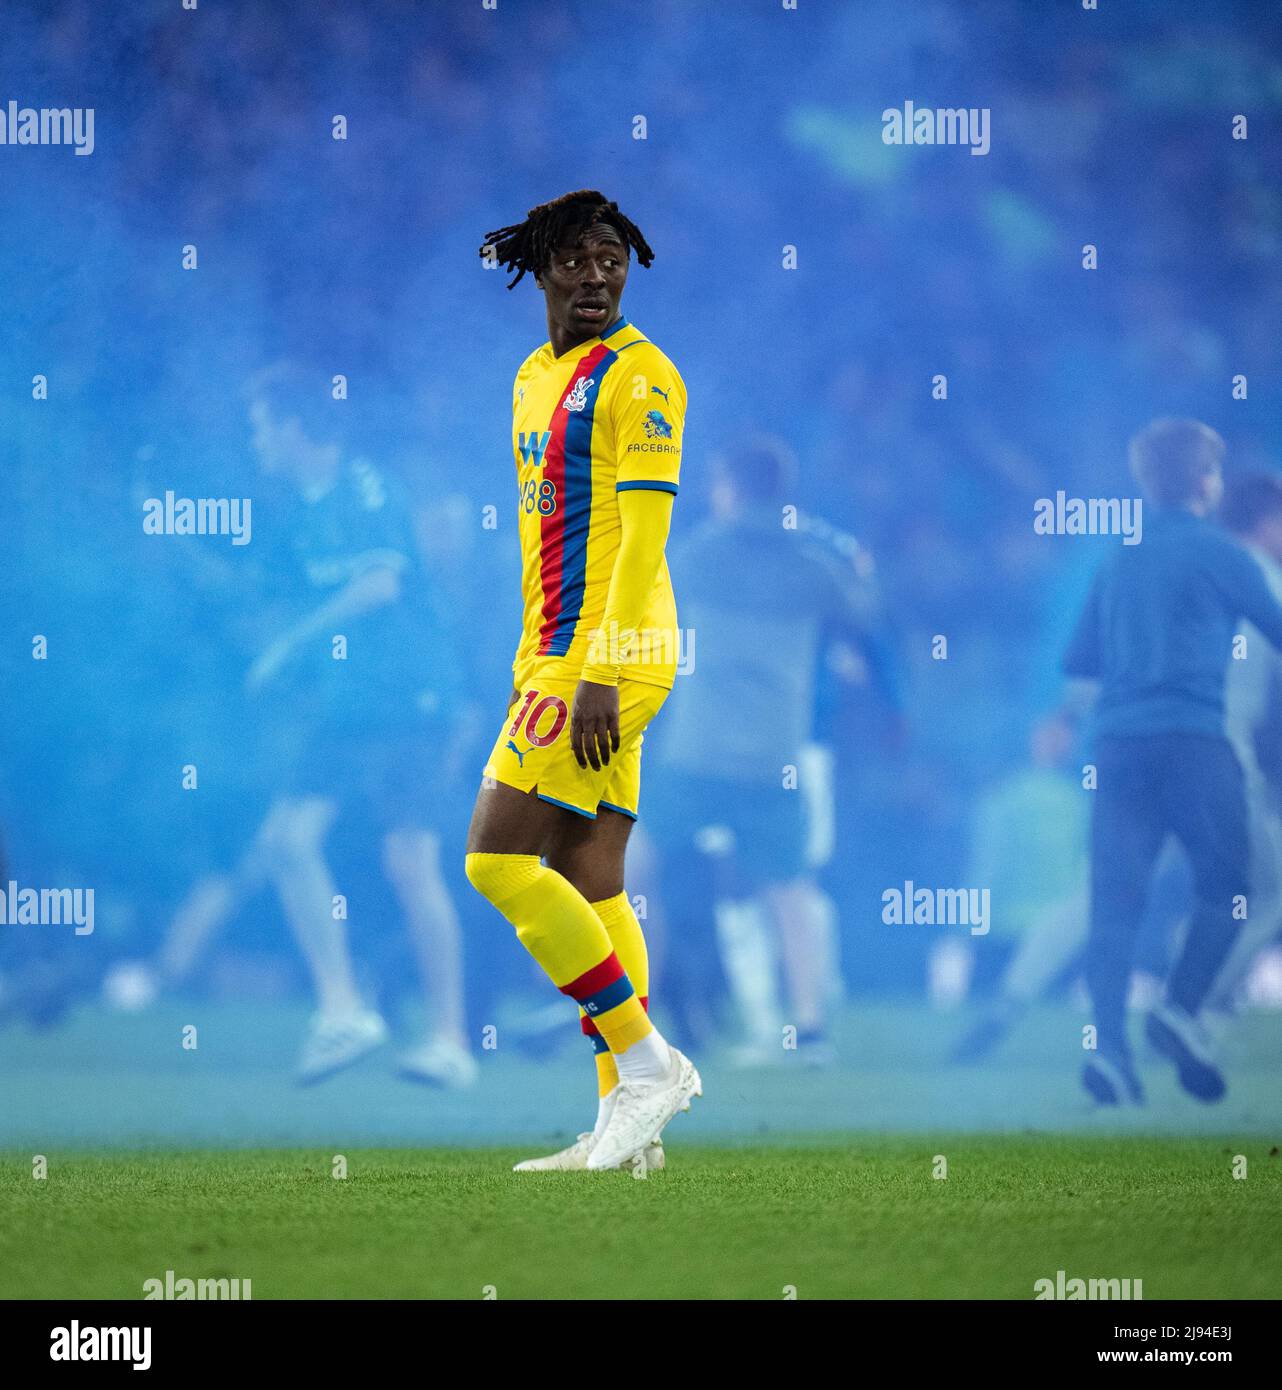 LIVERPOOL, ENGLAND - MAY 19: Eberechi Eze of Crystal Palace and Everton fans during the Premier League match between Everton and Crystal Palace at Goodison Park on May 19, 2022 in Liverpool, United Kingdom. (Photo by Sebastian Frej) Stock Photo